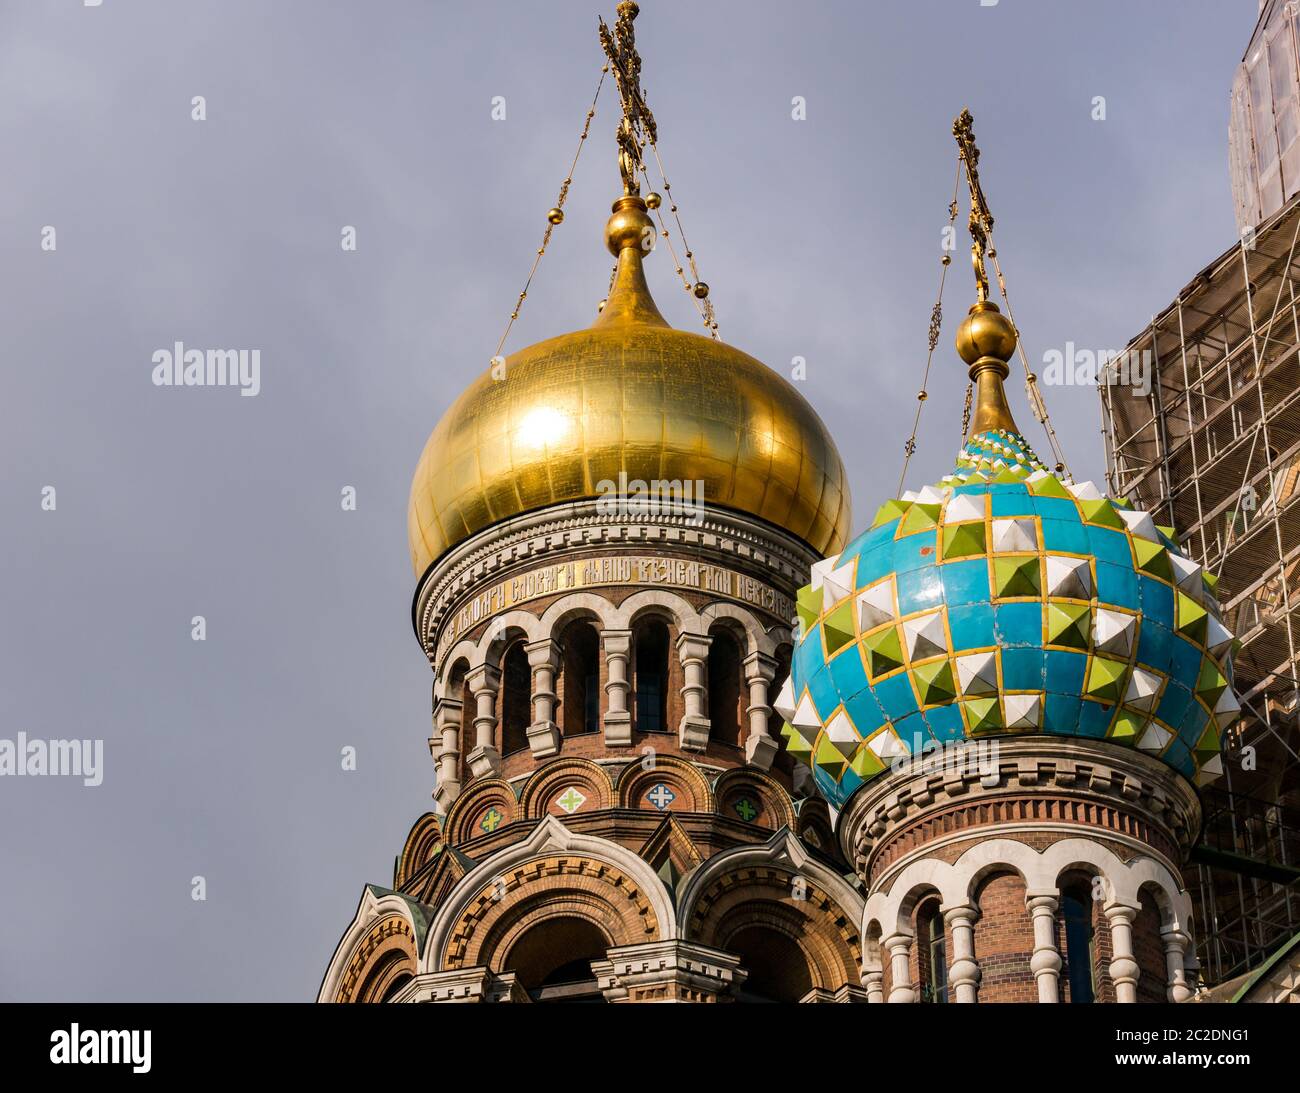 Church of the Savior on Spilled Blood onion domes, St Petersburg, Russia Stock Photo